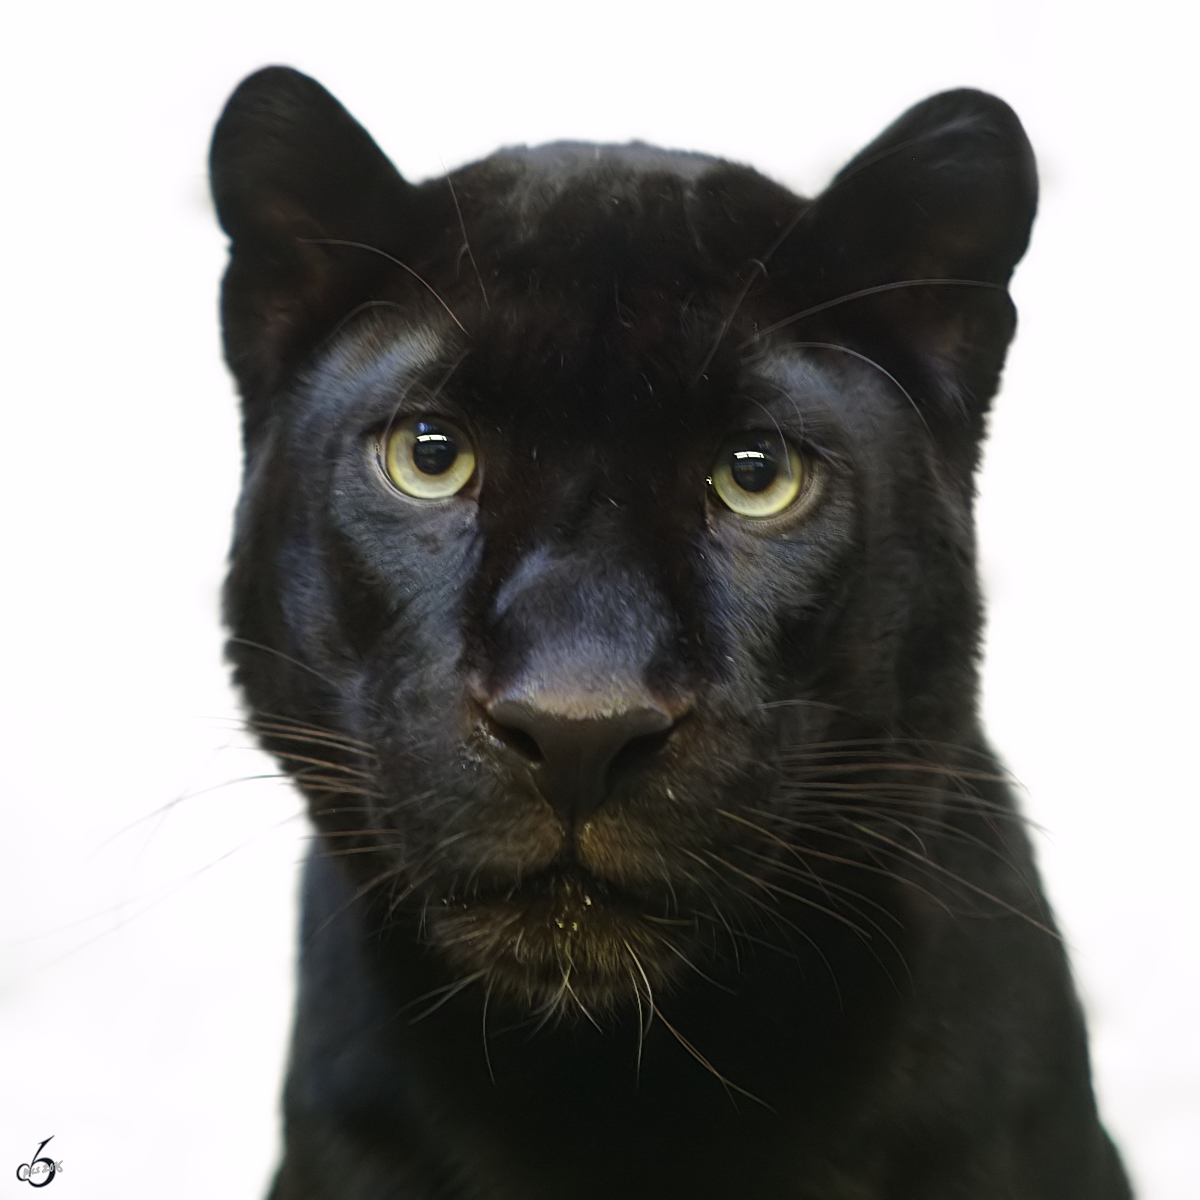 Auge in Auge - ein stolzer Panther im Zoo Wuppertal. (Januar 2009)